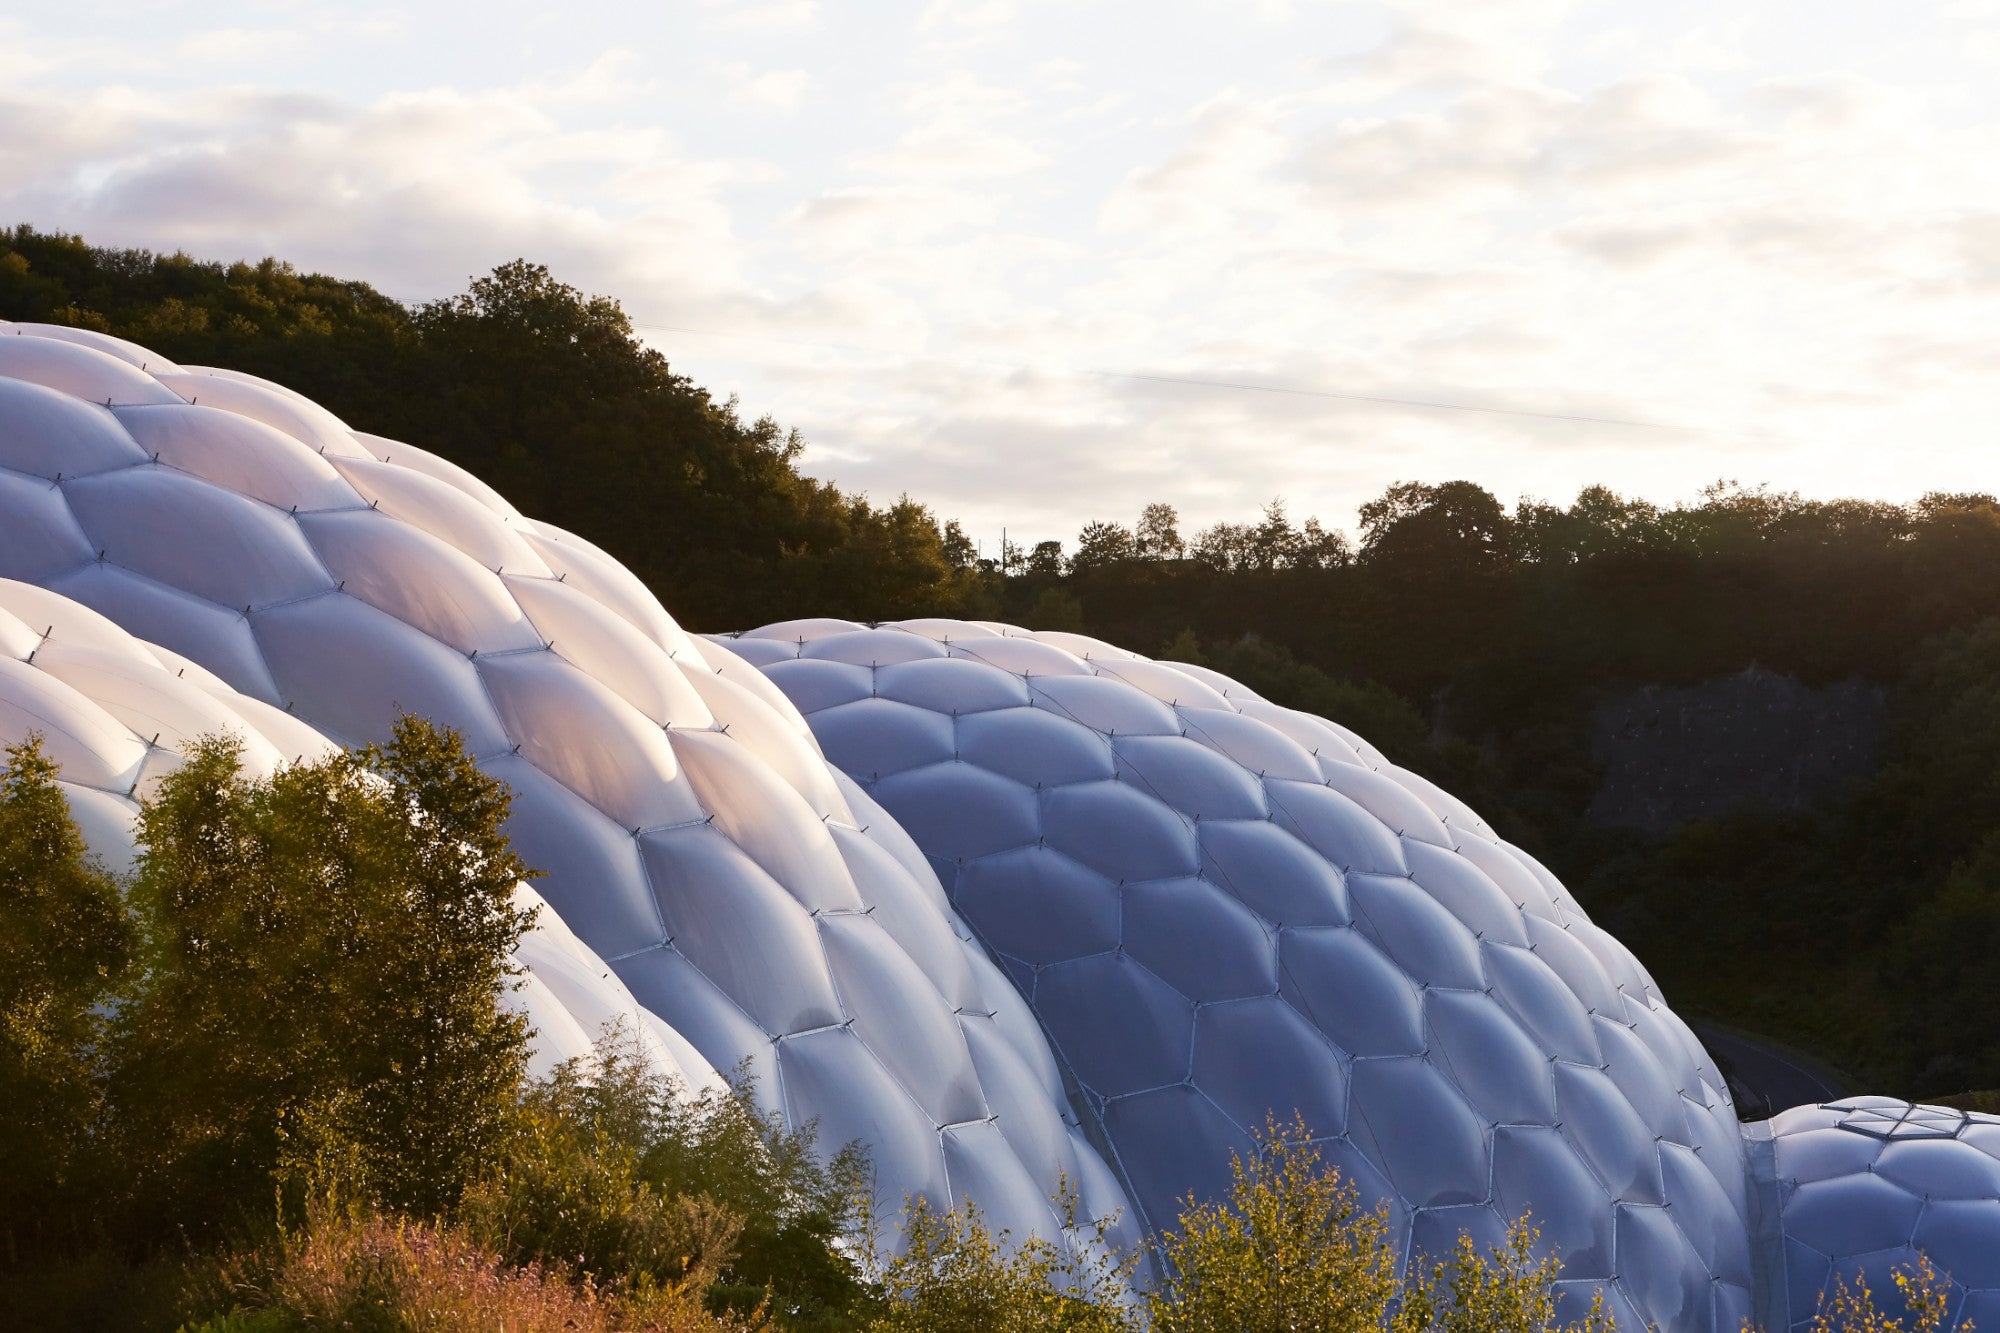 Become an Eden Project Member and Save 10% in our Online Shop